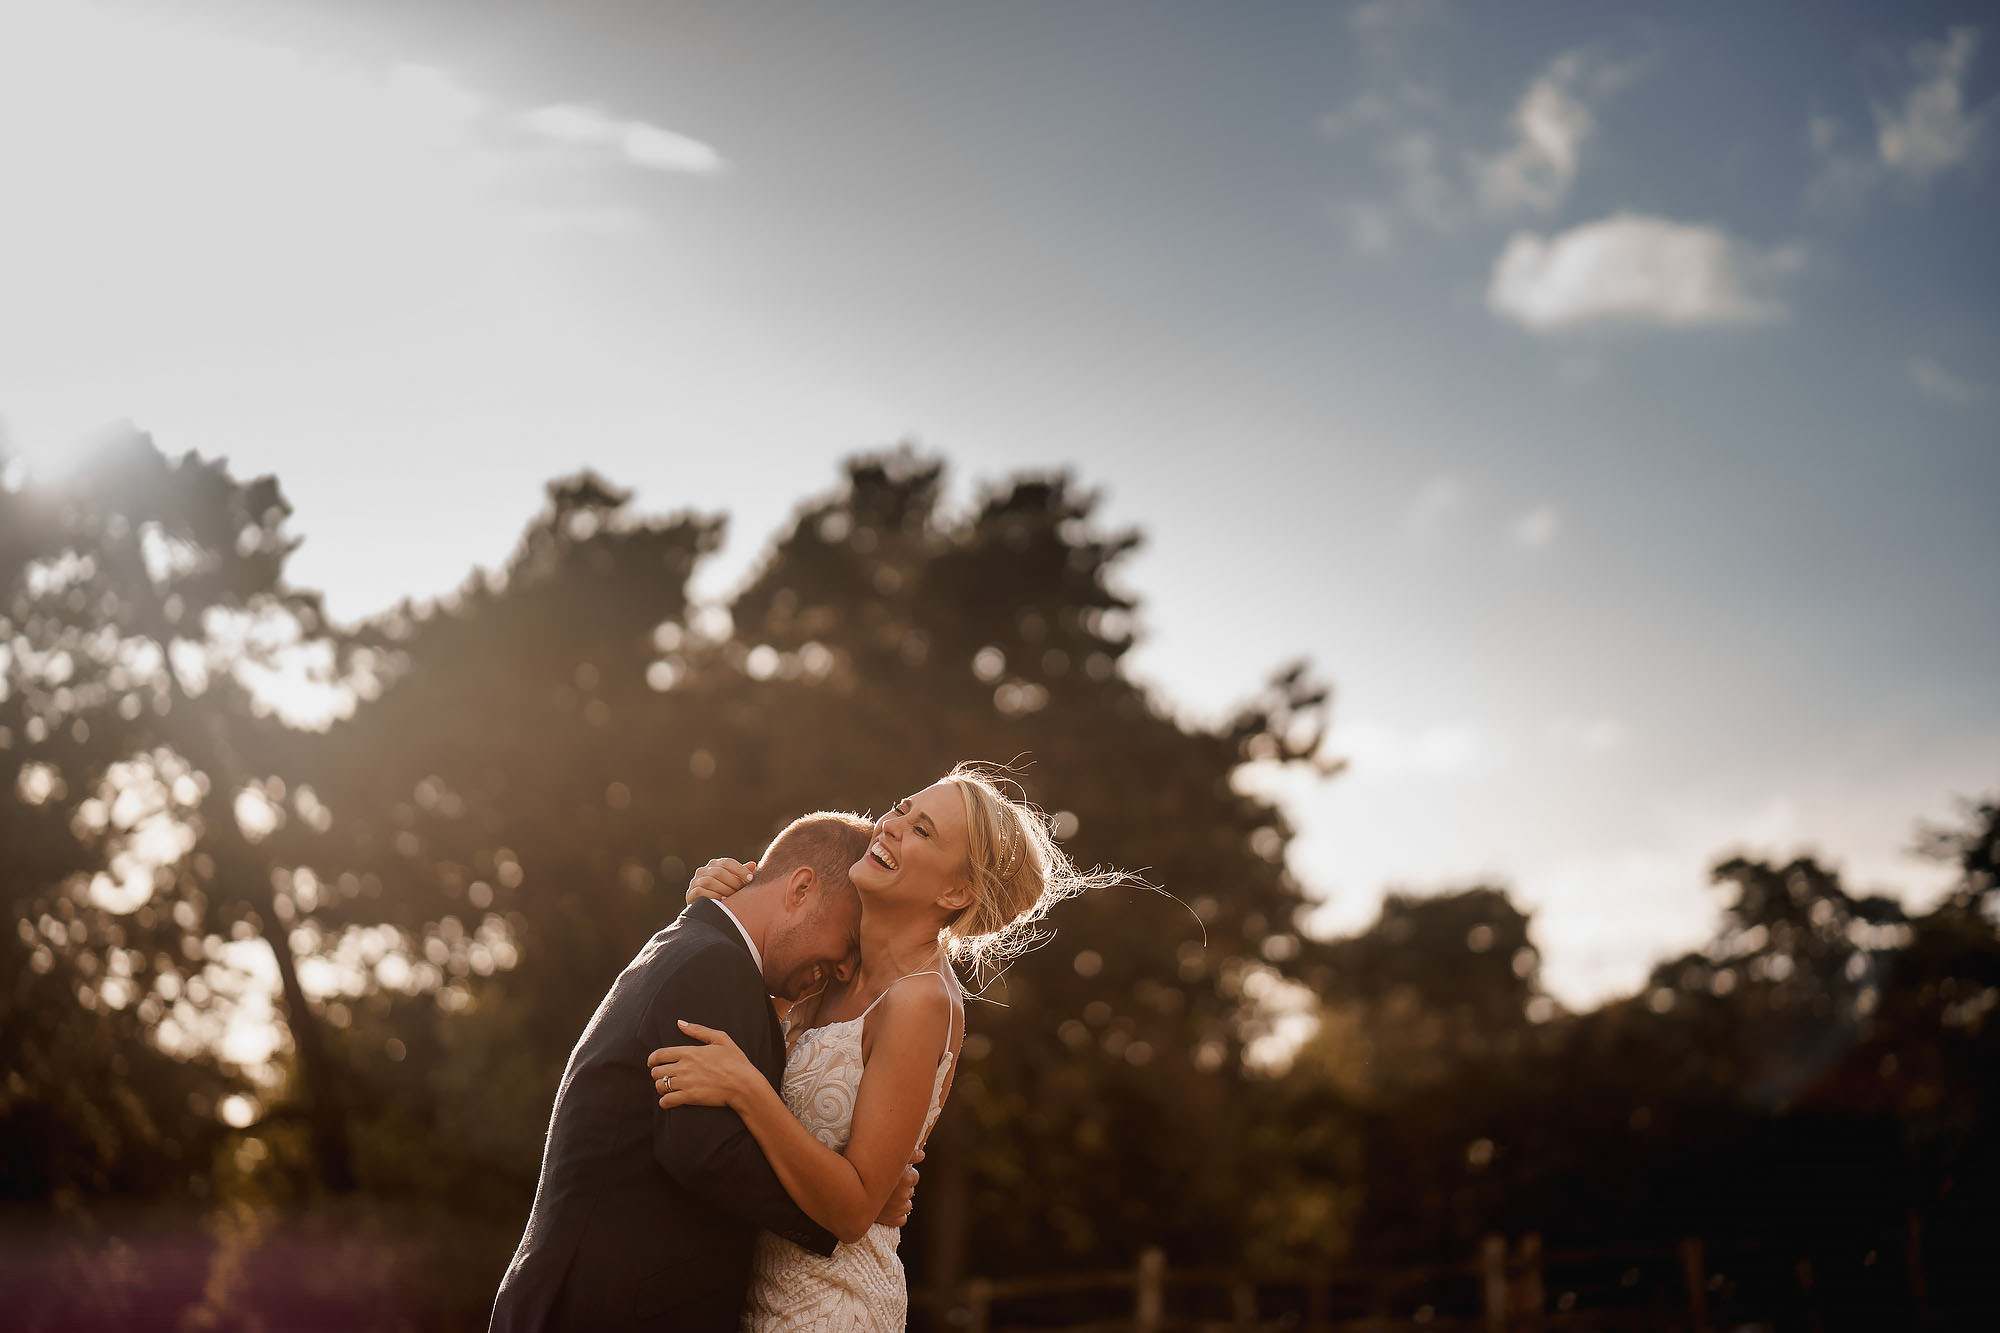 Best wedding photography in cheshire 2018